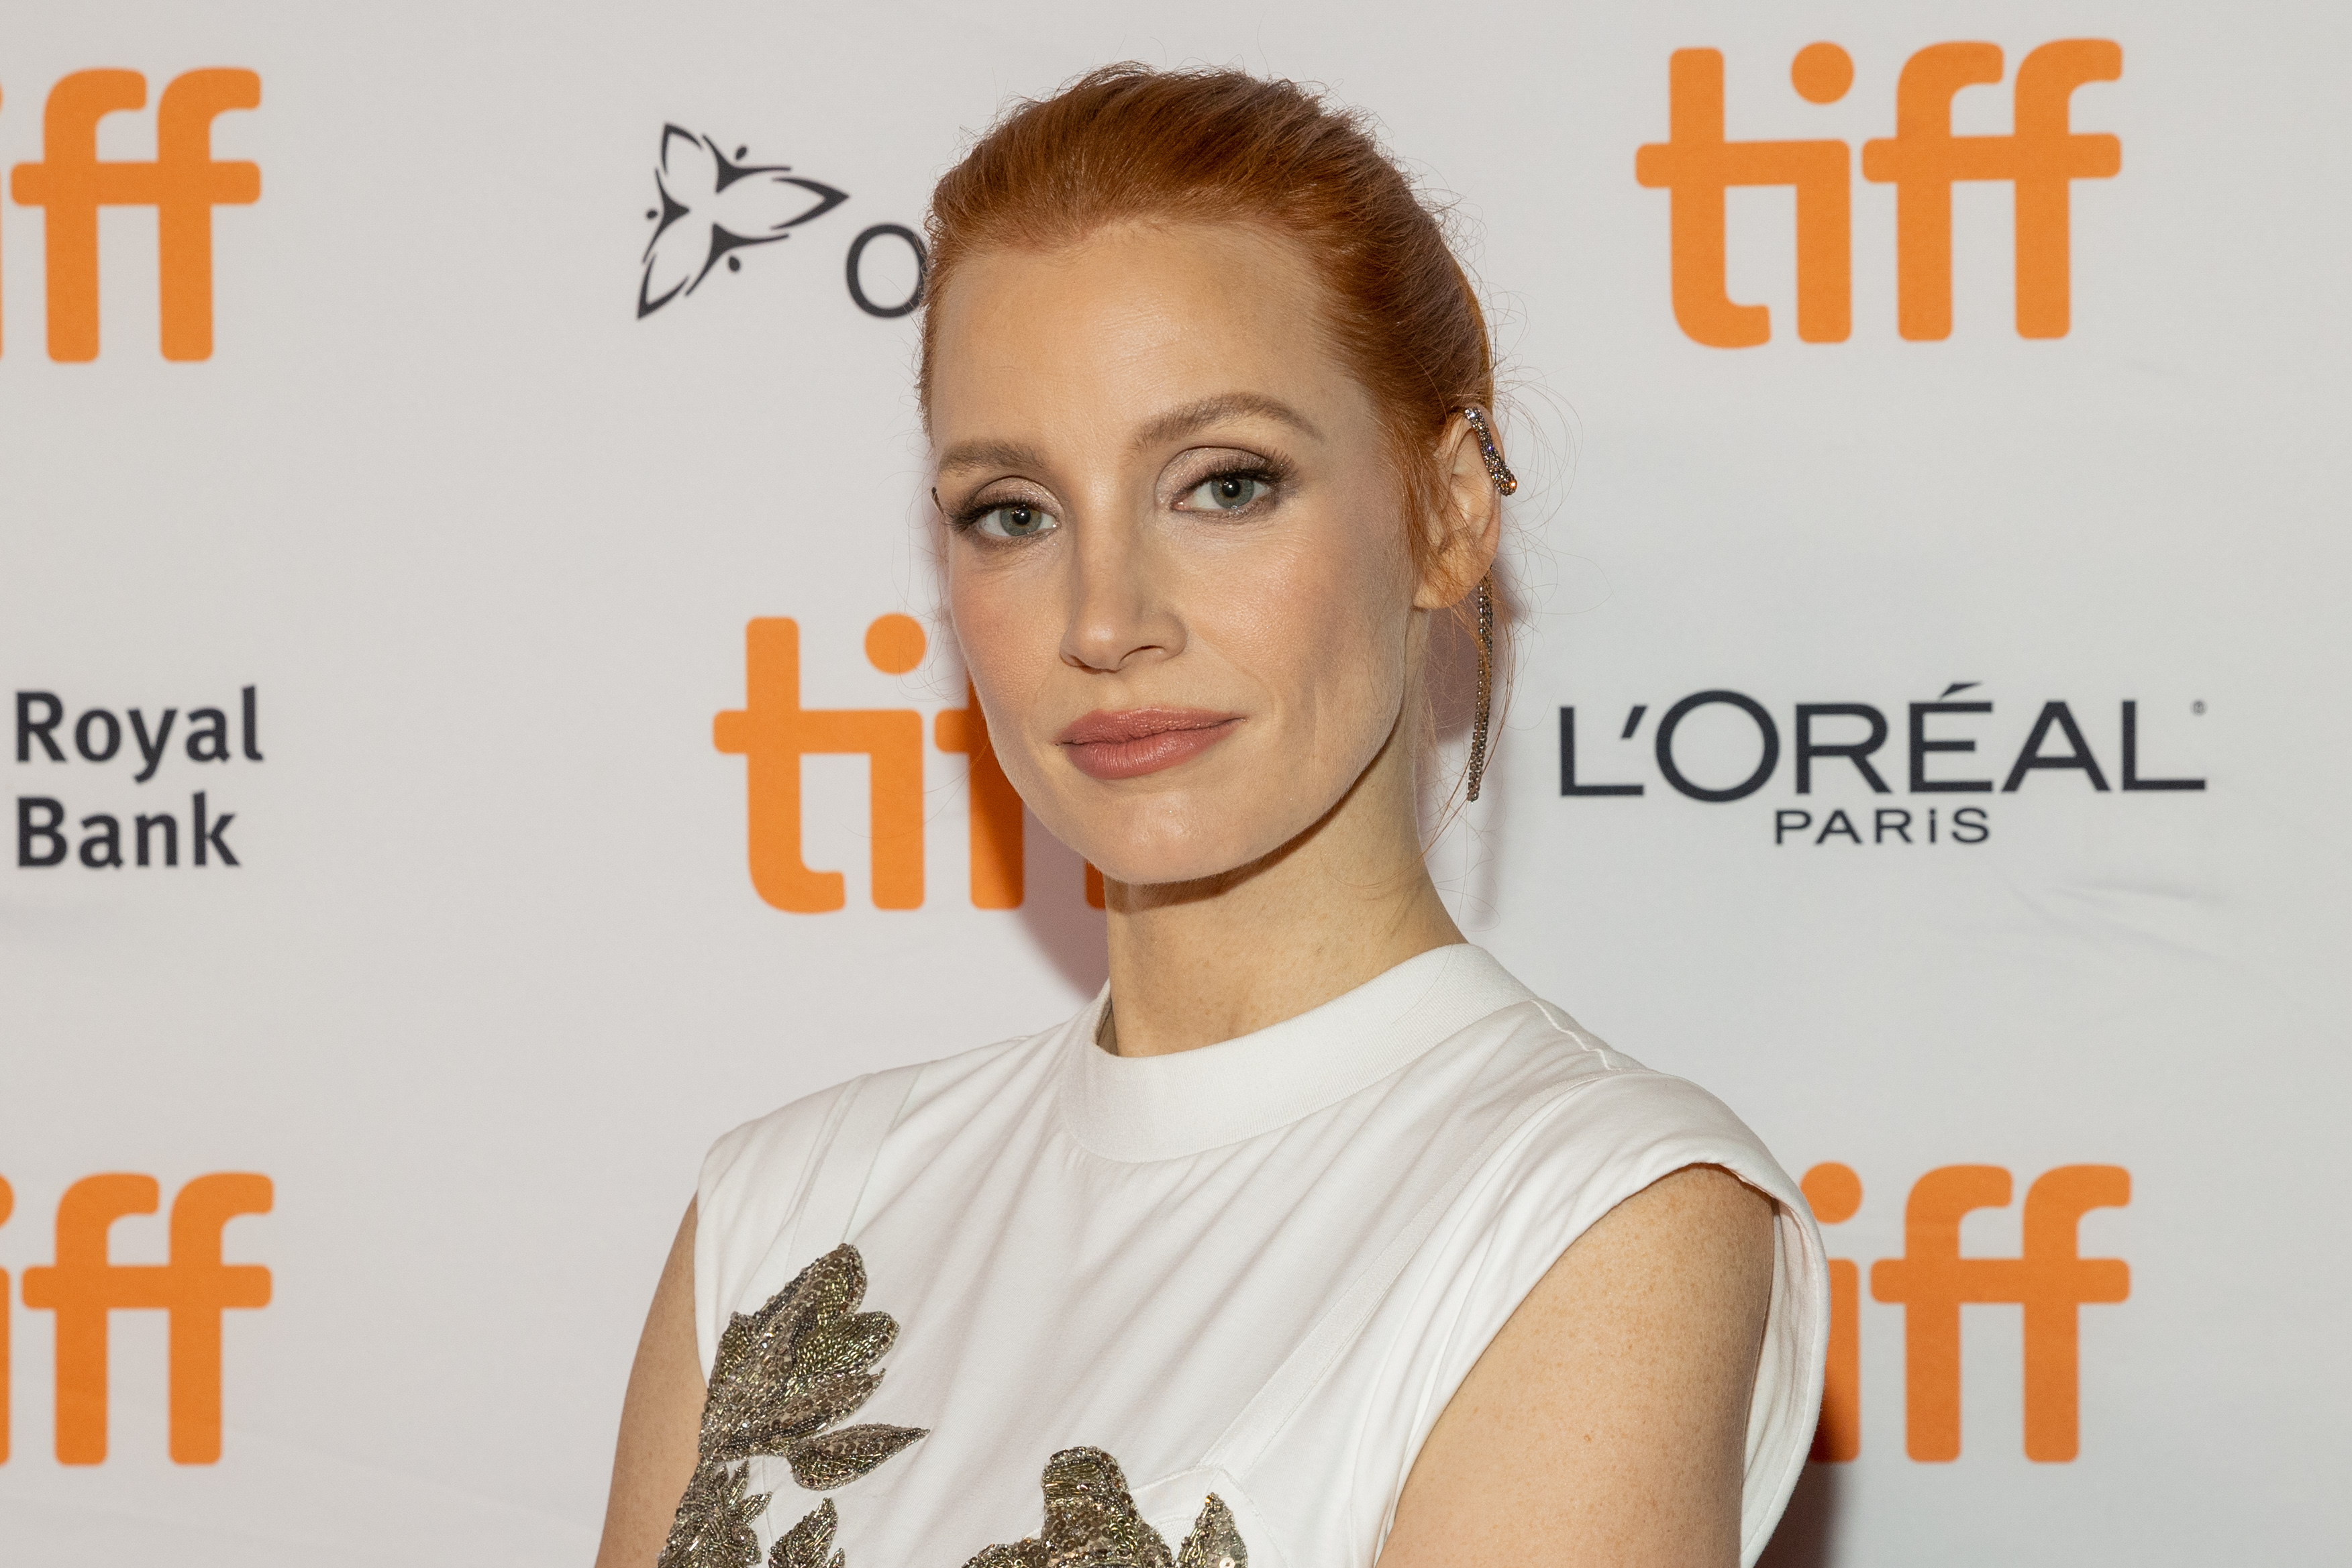 Jessica Chastain, in a white  dress with her hair tied in a bun, at the premiere of her movie 'The Eyes of Tammy Faye' at the Toronto International Film Festival in 2021.